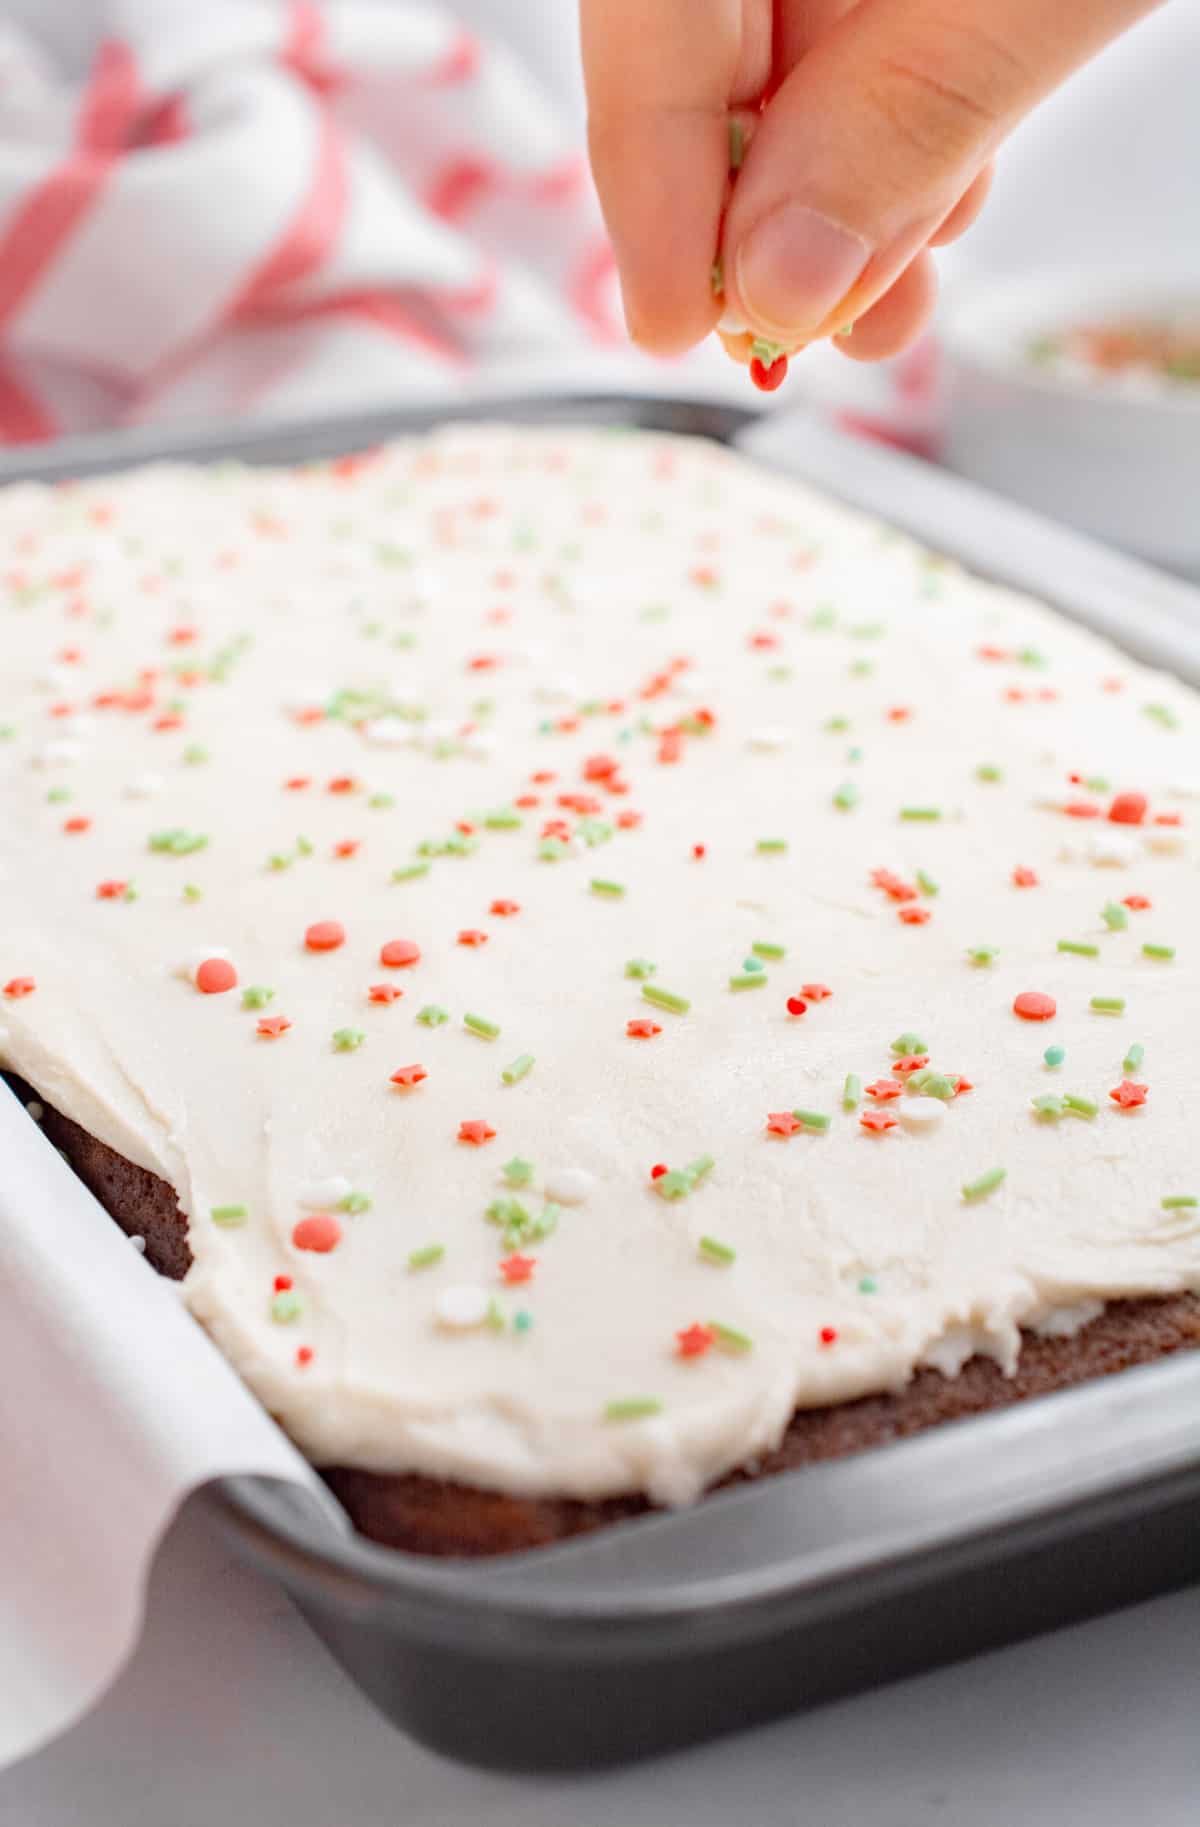 A hand sprinkling Christmas sprinkles on a frosted vegan gingerbread cake,